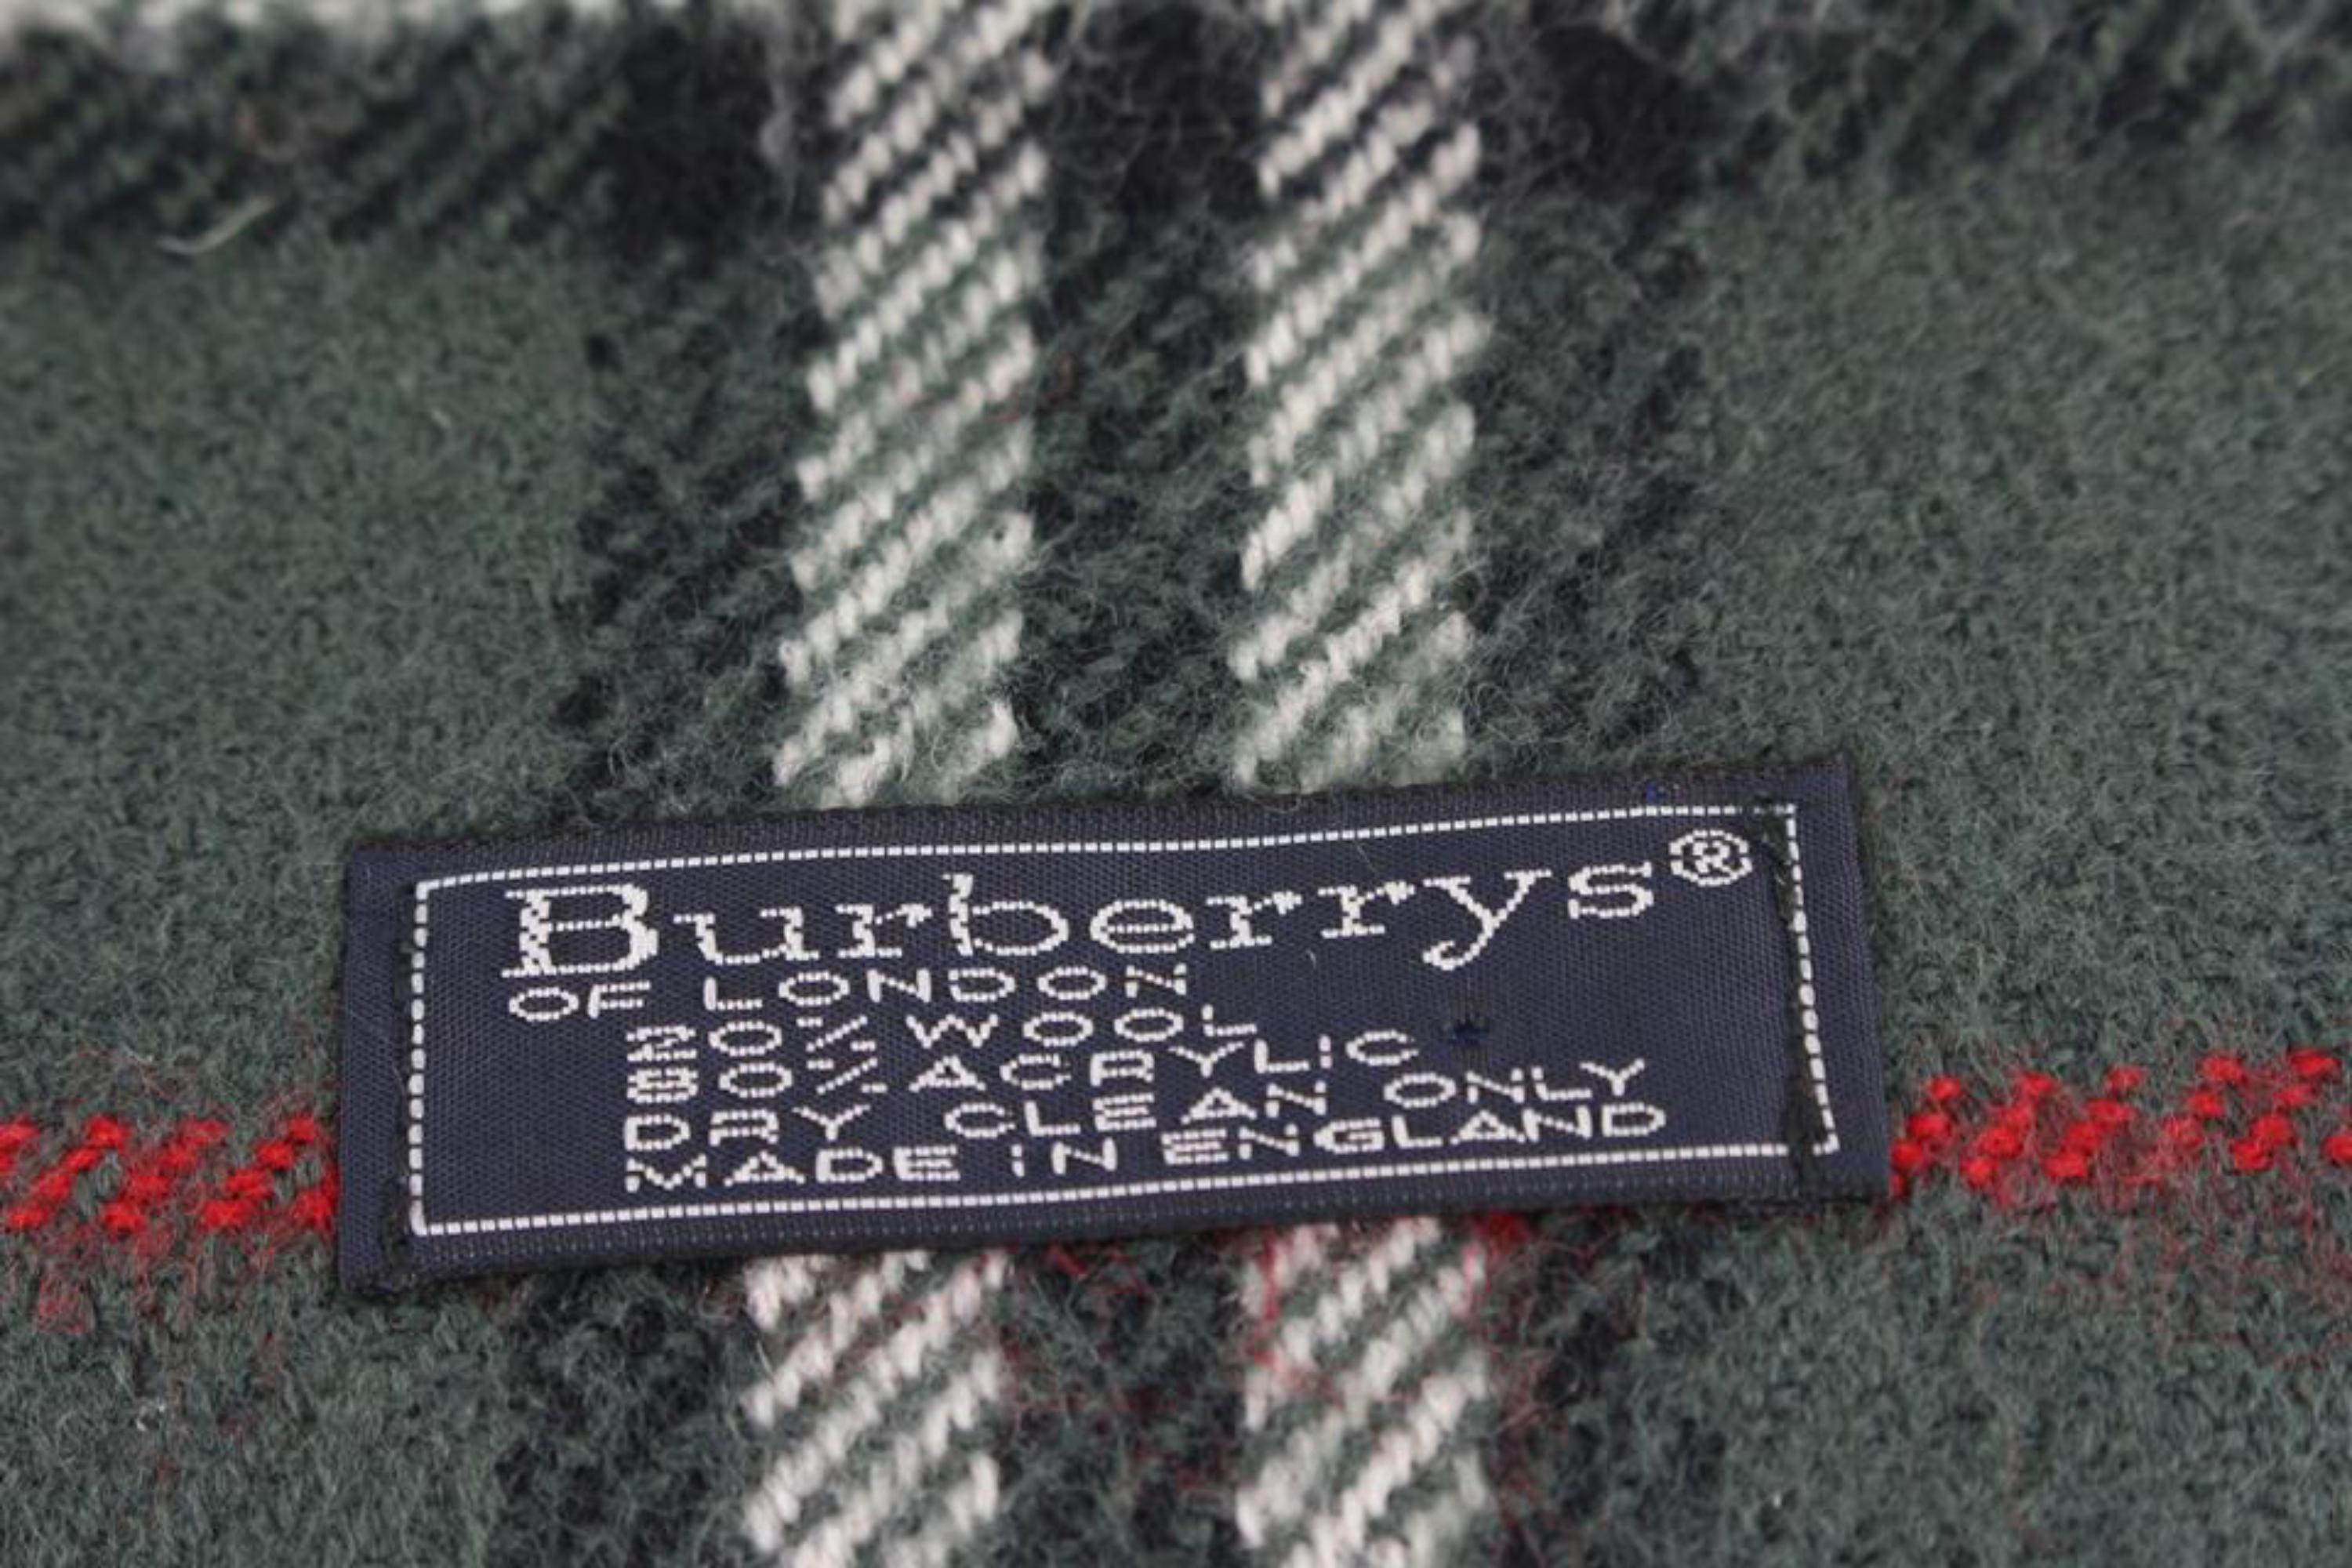 Burberry Ultra Rare Olive Green Charcoal Nova Check Classic Wool Scarf 1223b1
Made In: England
Measurements: Length:  13.5